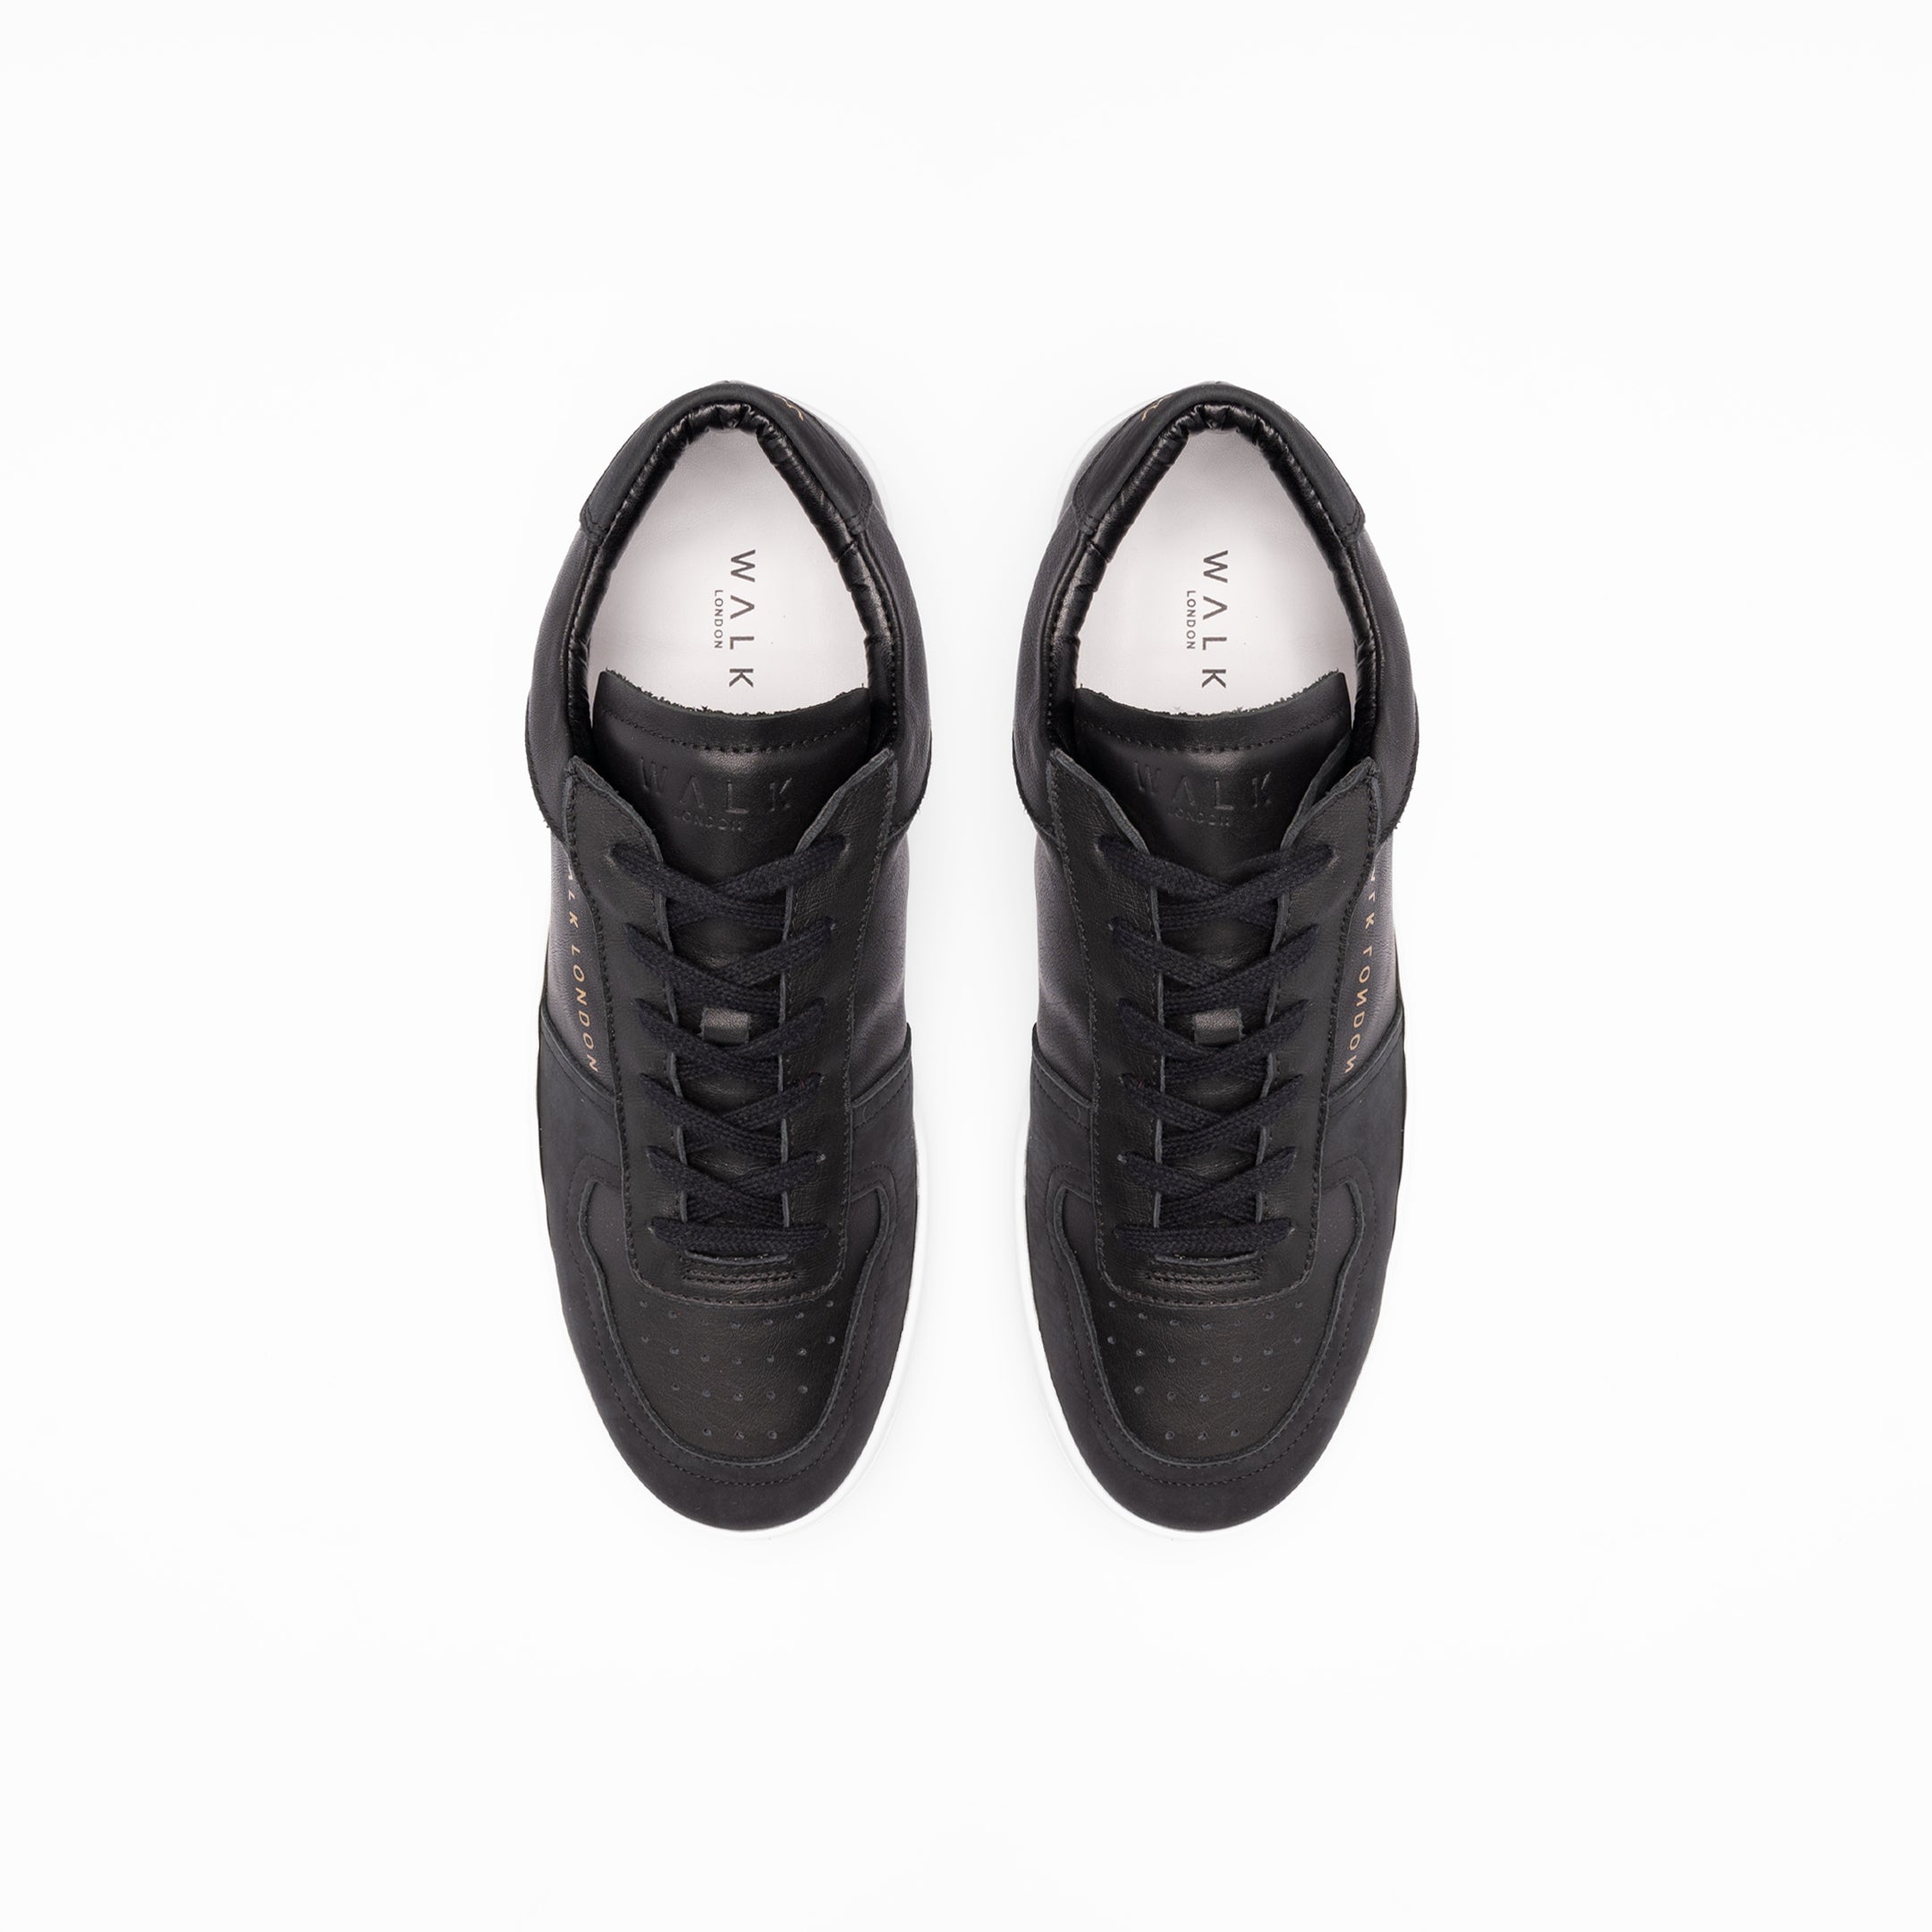 Walk London Neo Sneaker Black Leather and Suede